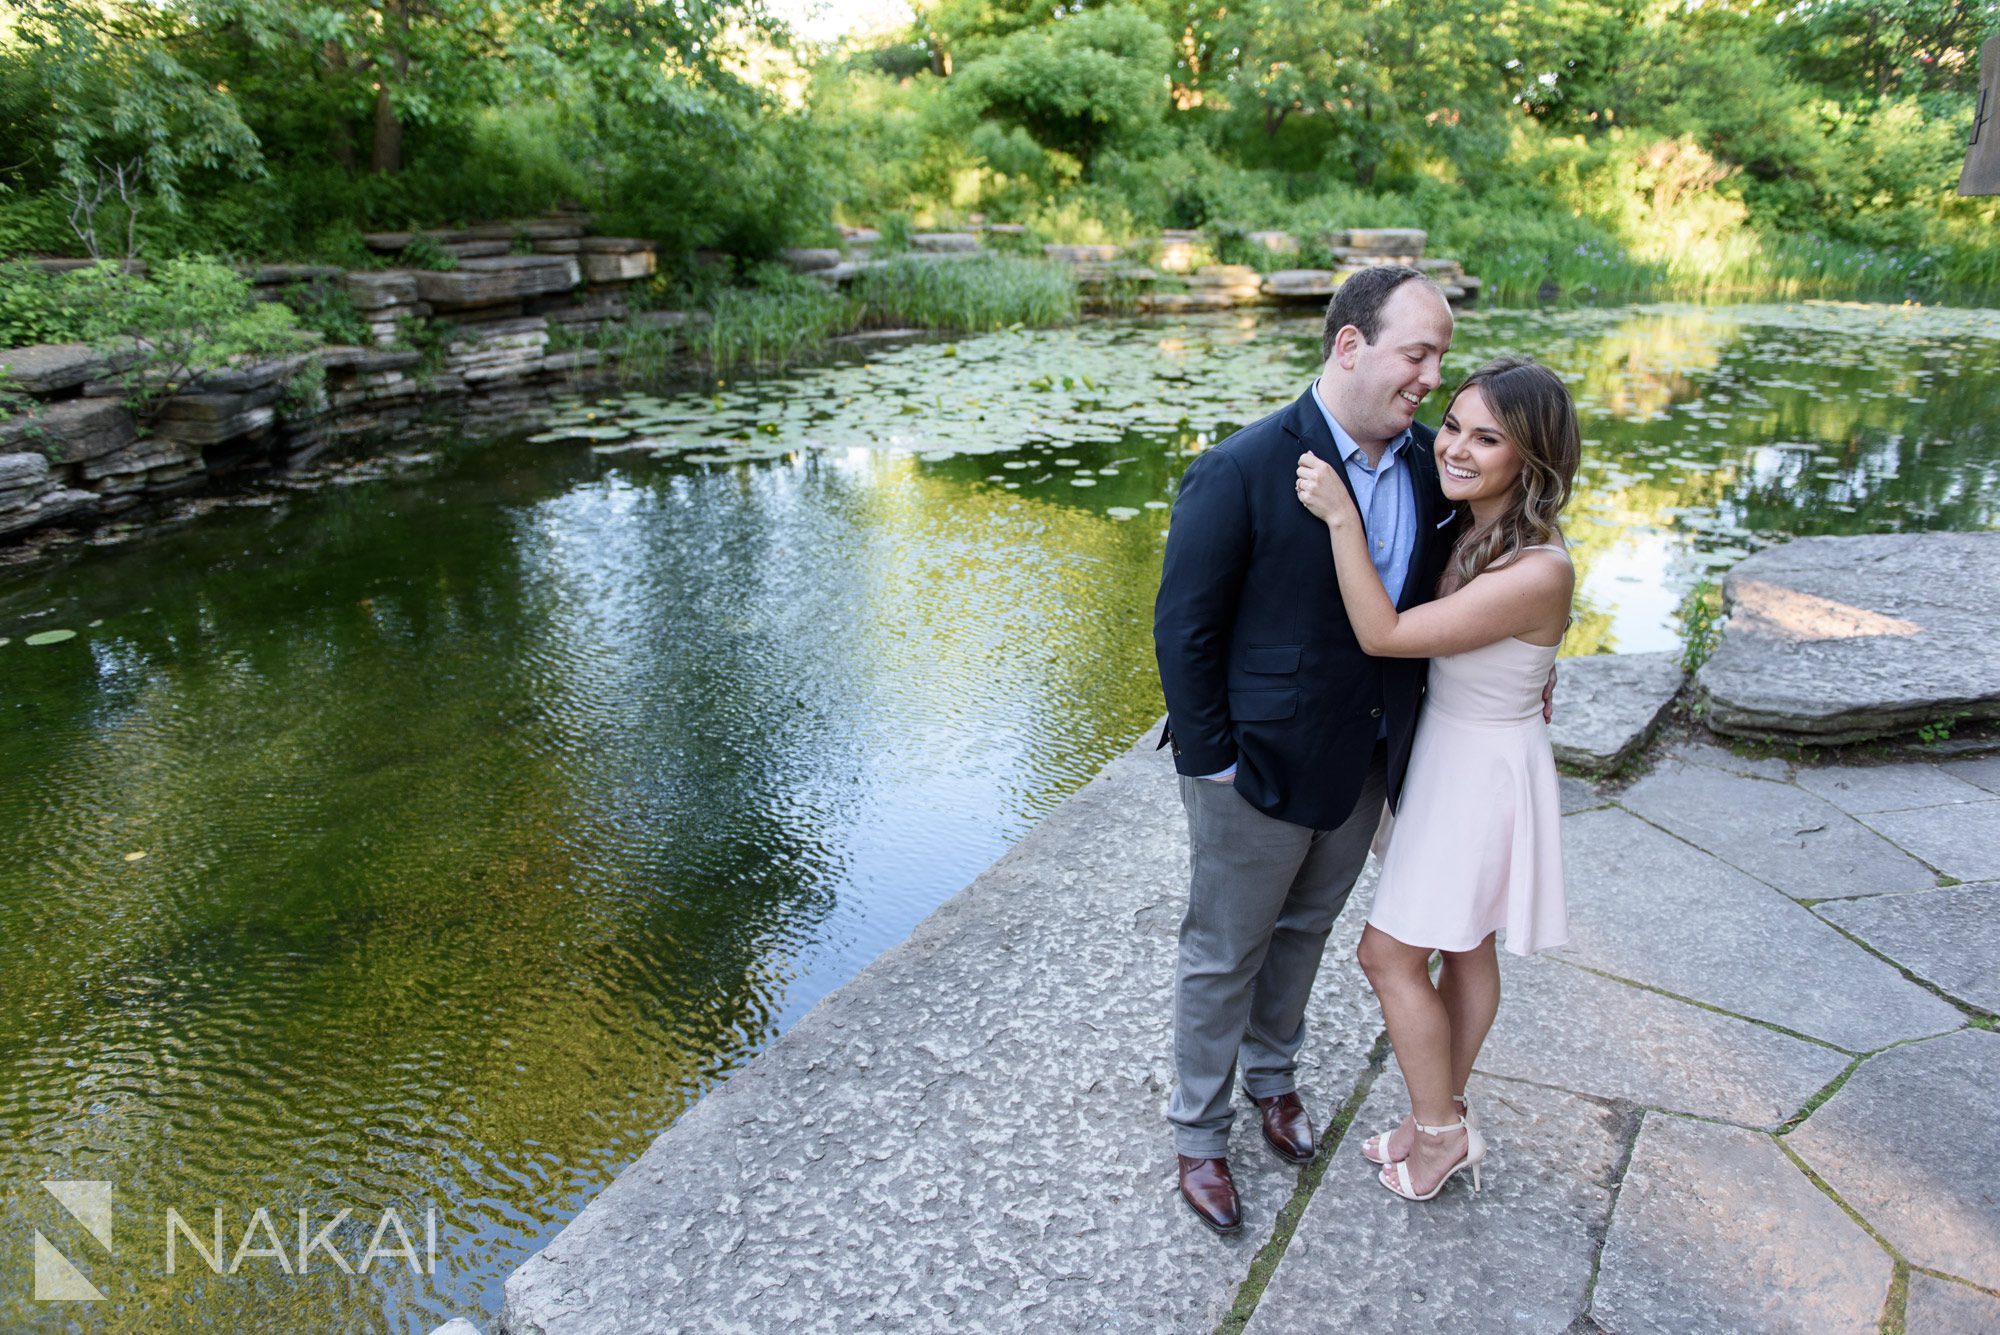 caldwell lily pool engagement pictures chicago Lincoln park 